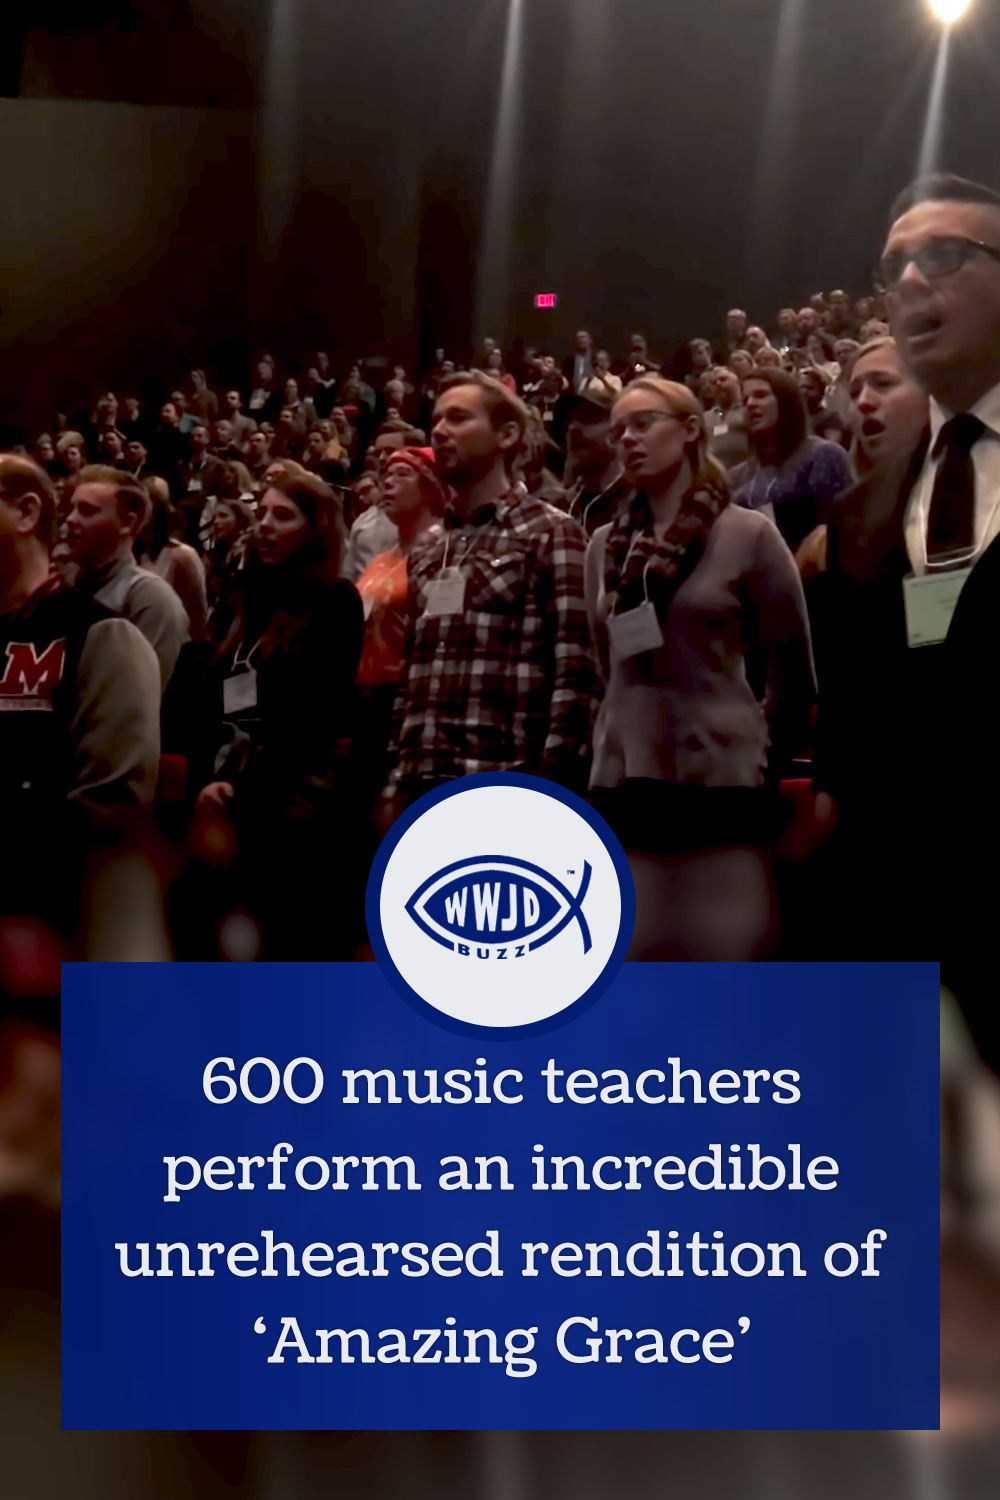 600 music teachers perform an incredible unrehearsed rendition of ‘Amazing Grace’